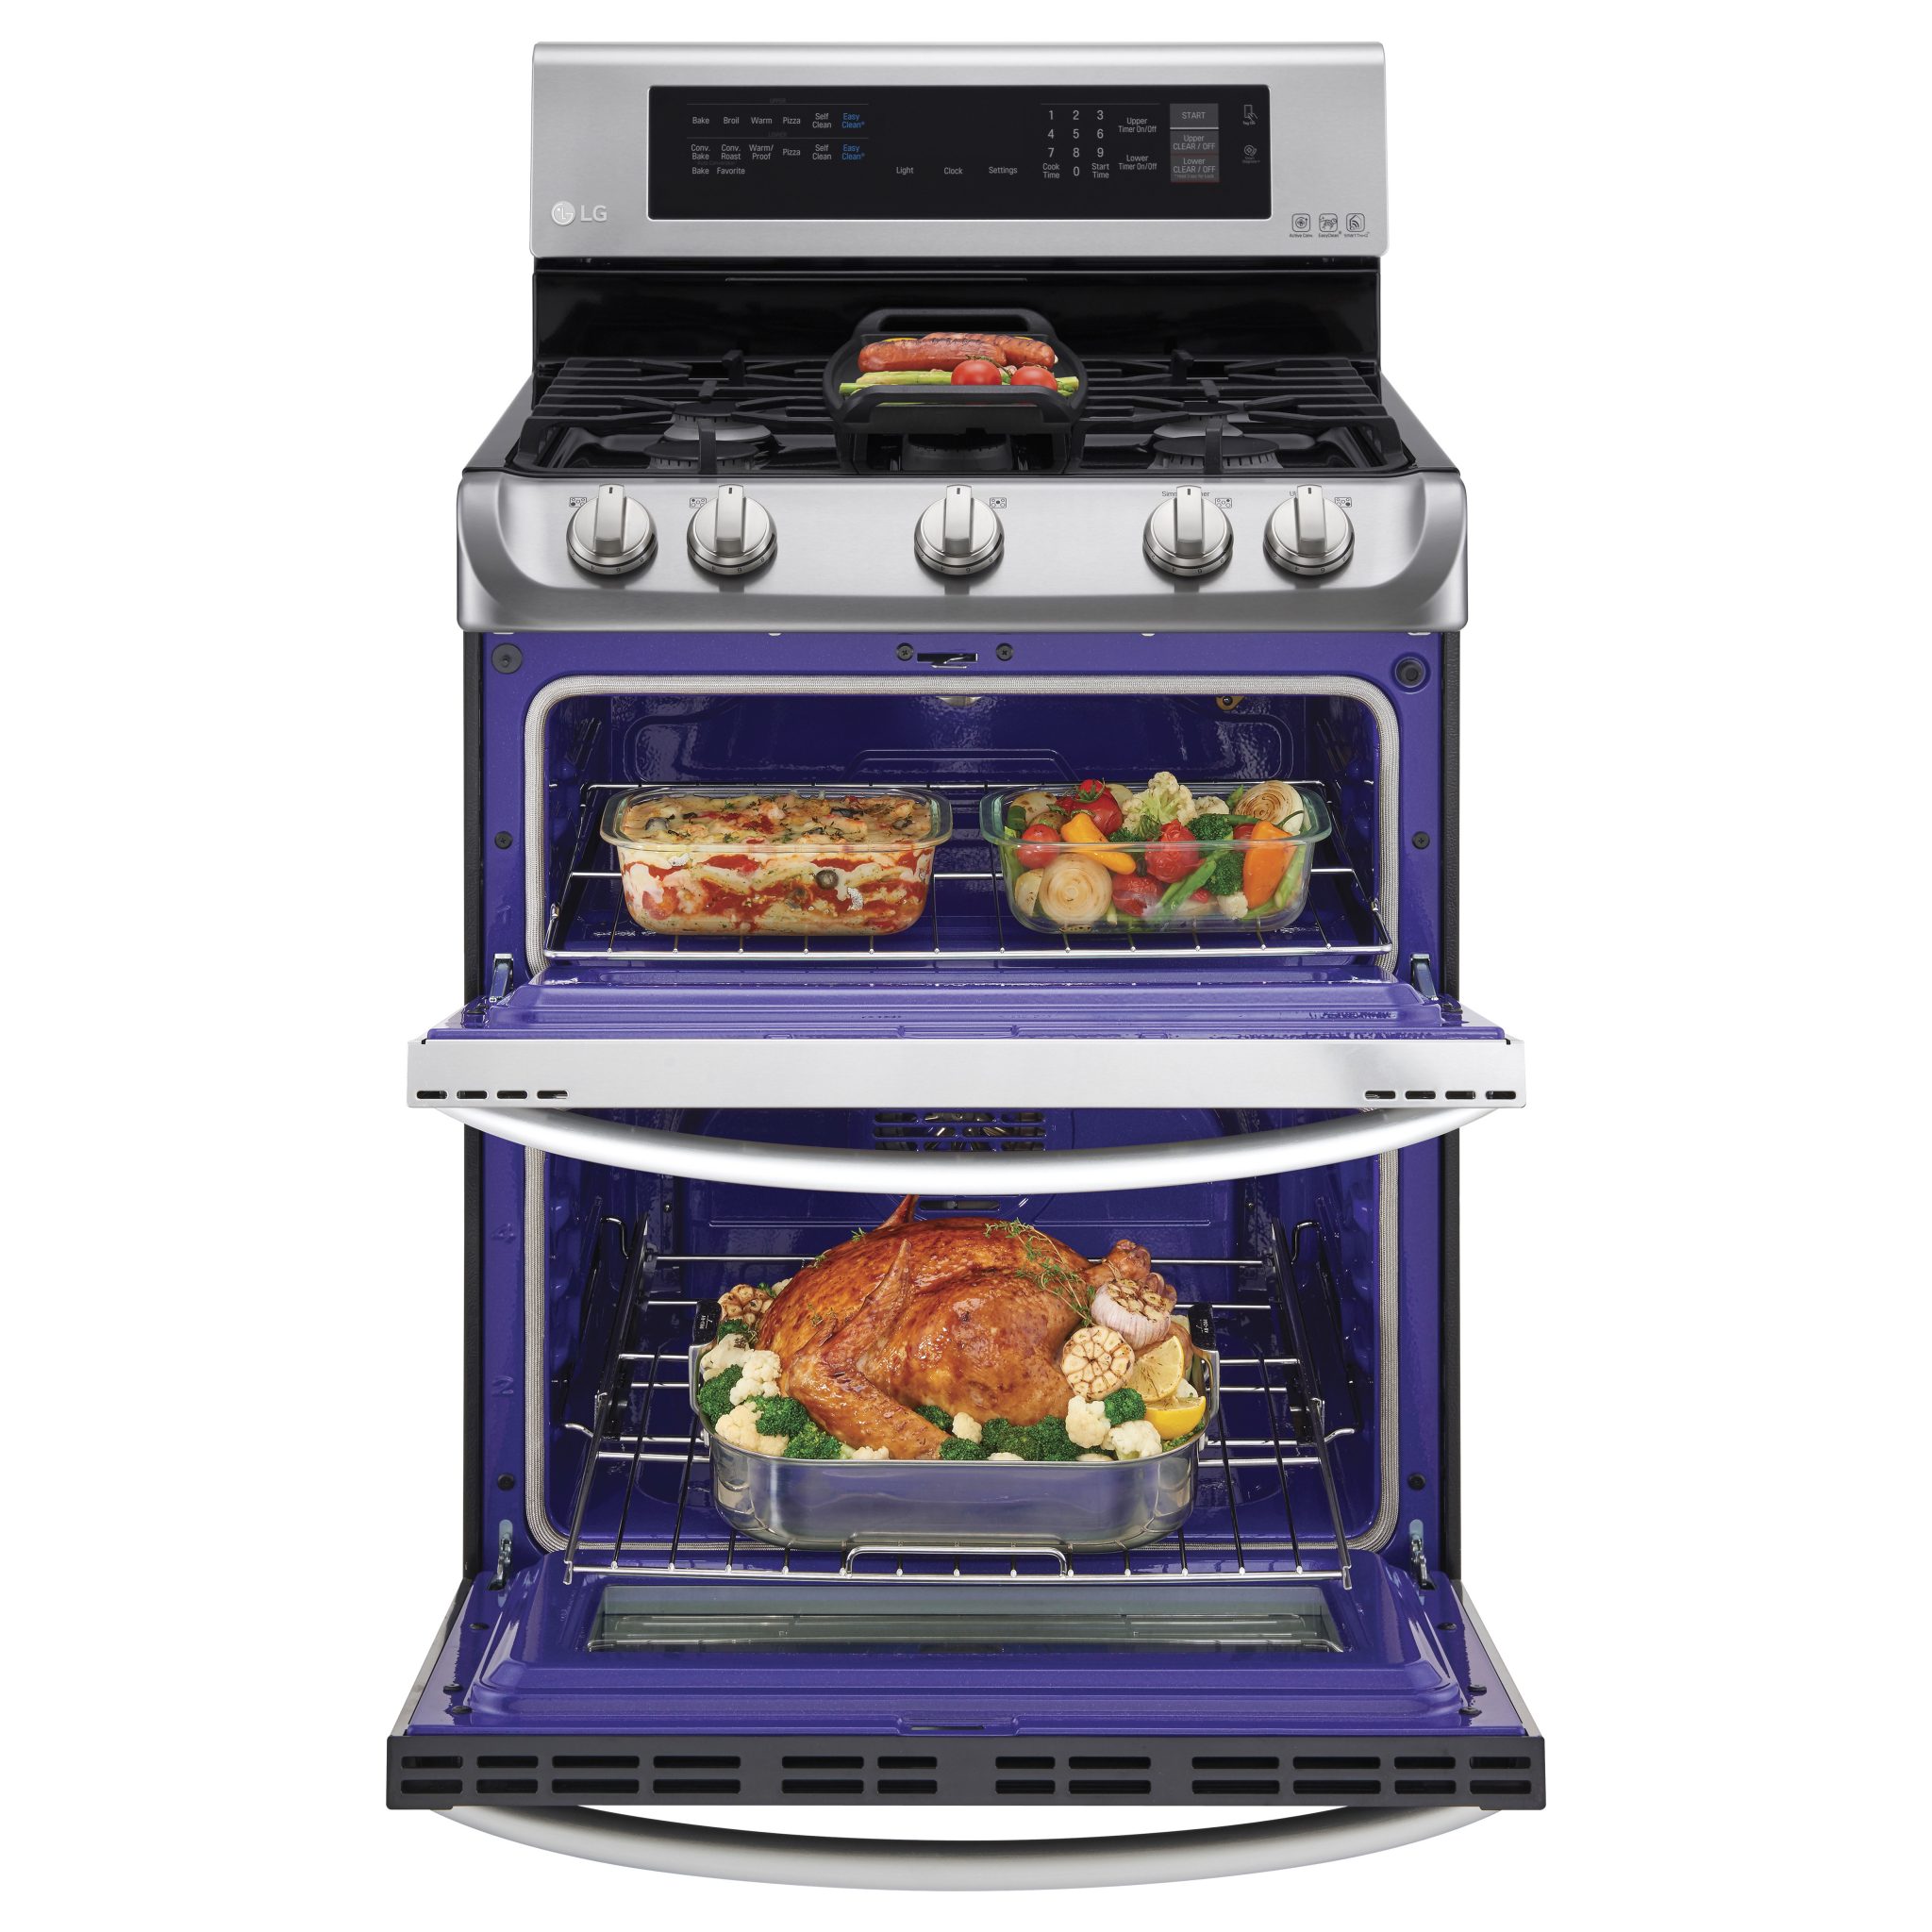 Prep For The Holidays With The LG ProBake Double Oven From Best Buy